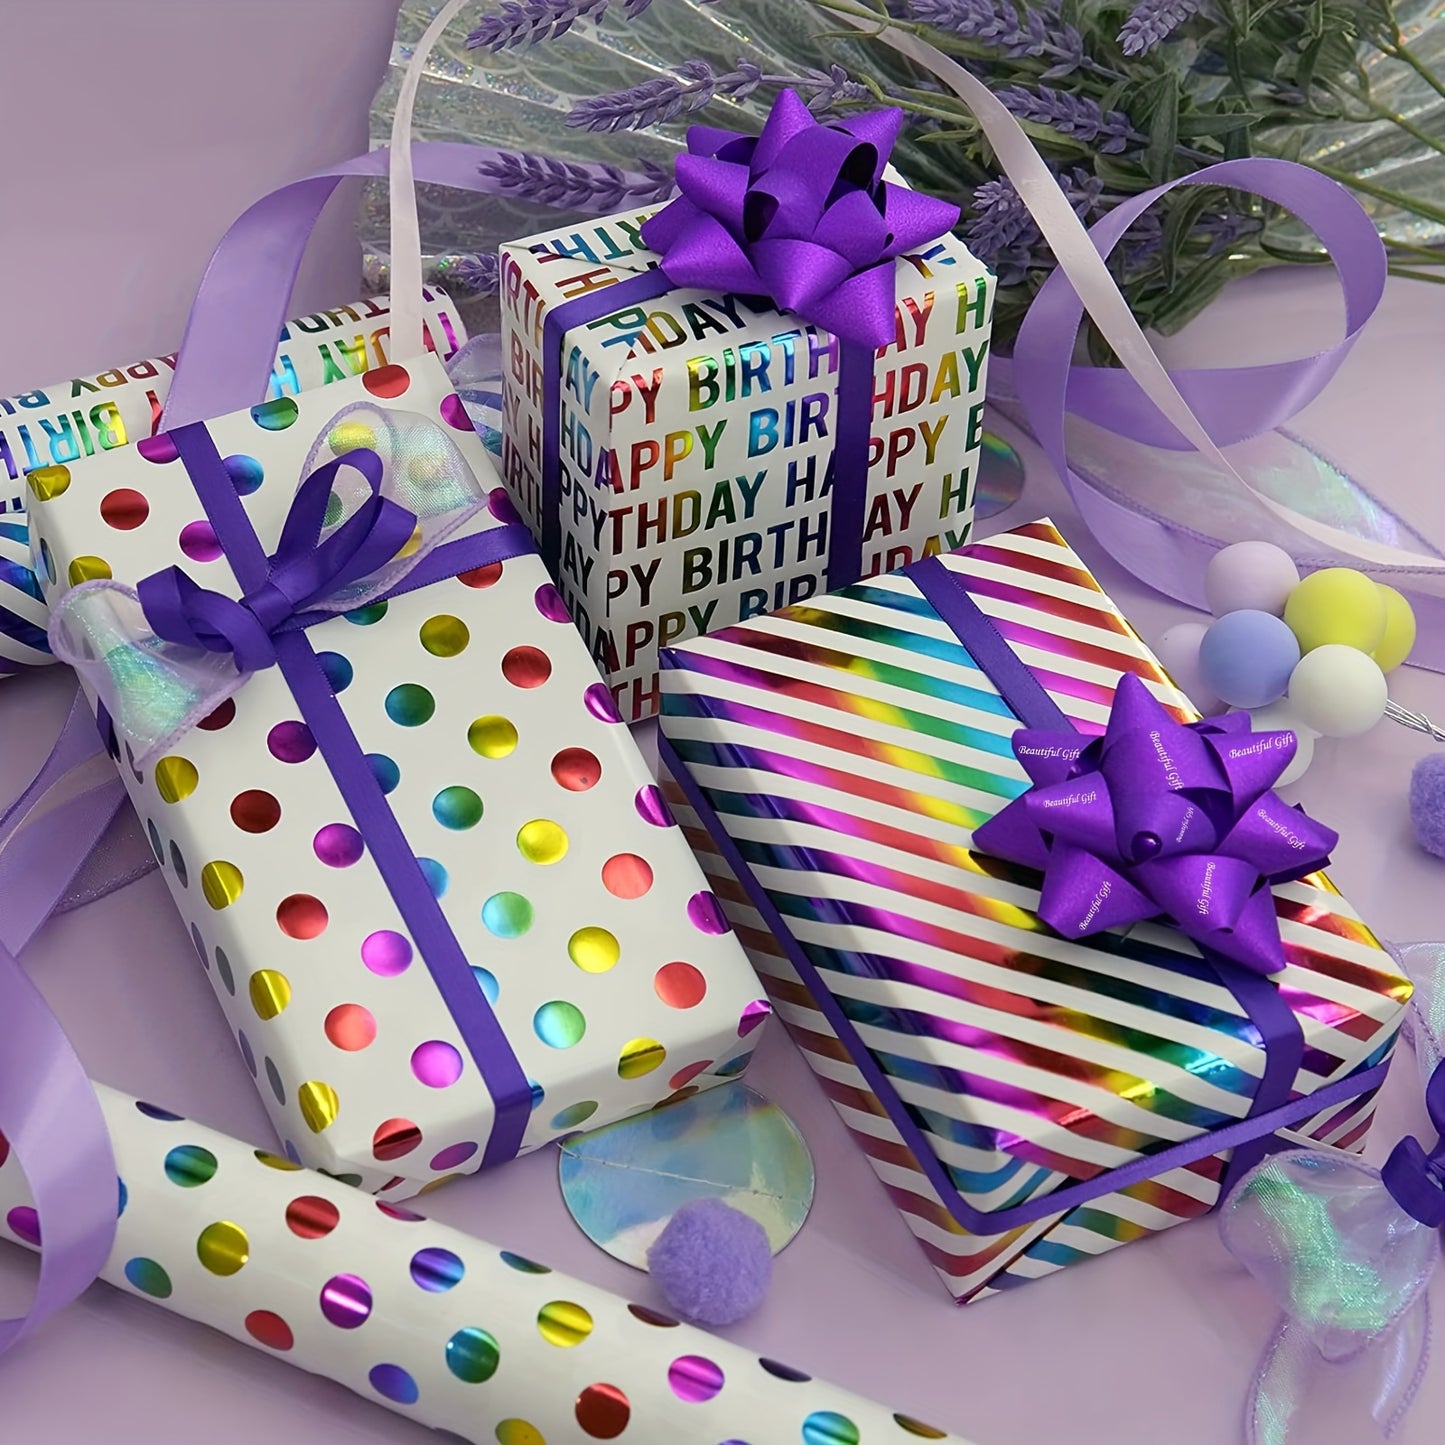 """3 rolls, 3 rolls Colorful Birthday Wrapping Paper Rolls - 3 Designs - 17"""" x 10' - Perfect for Gift Wrapping and Birthdays""" Bee's to Find